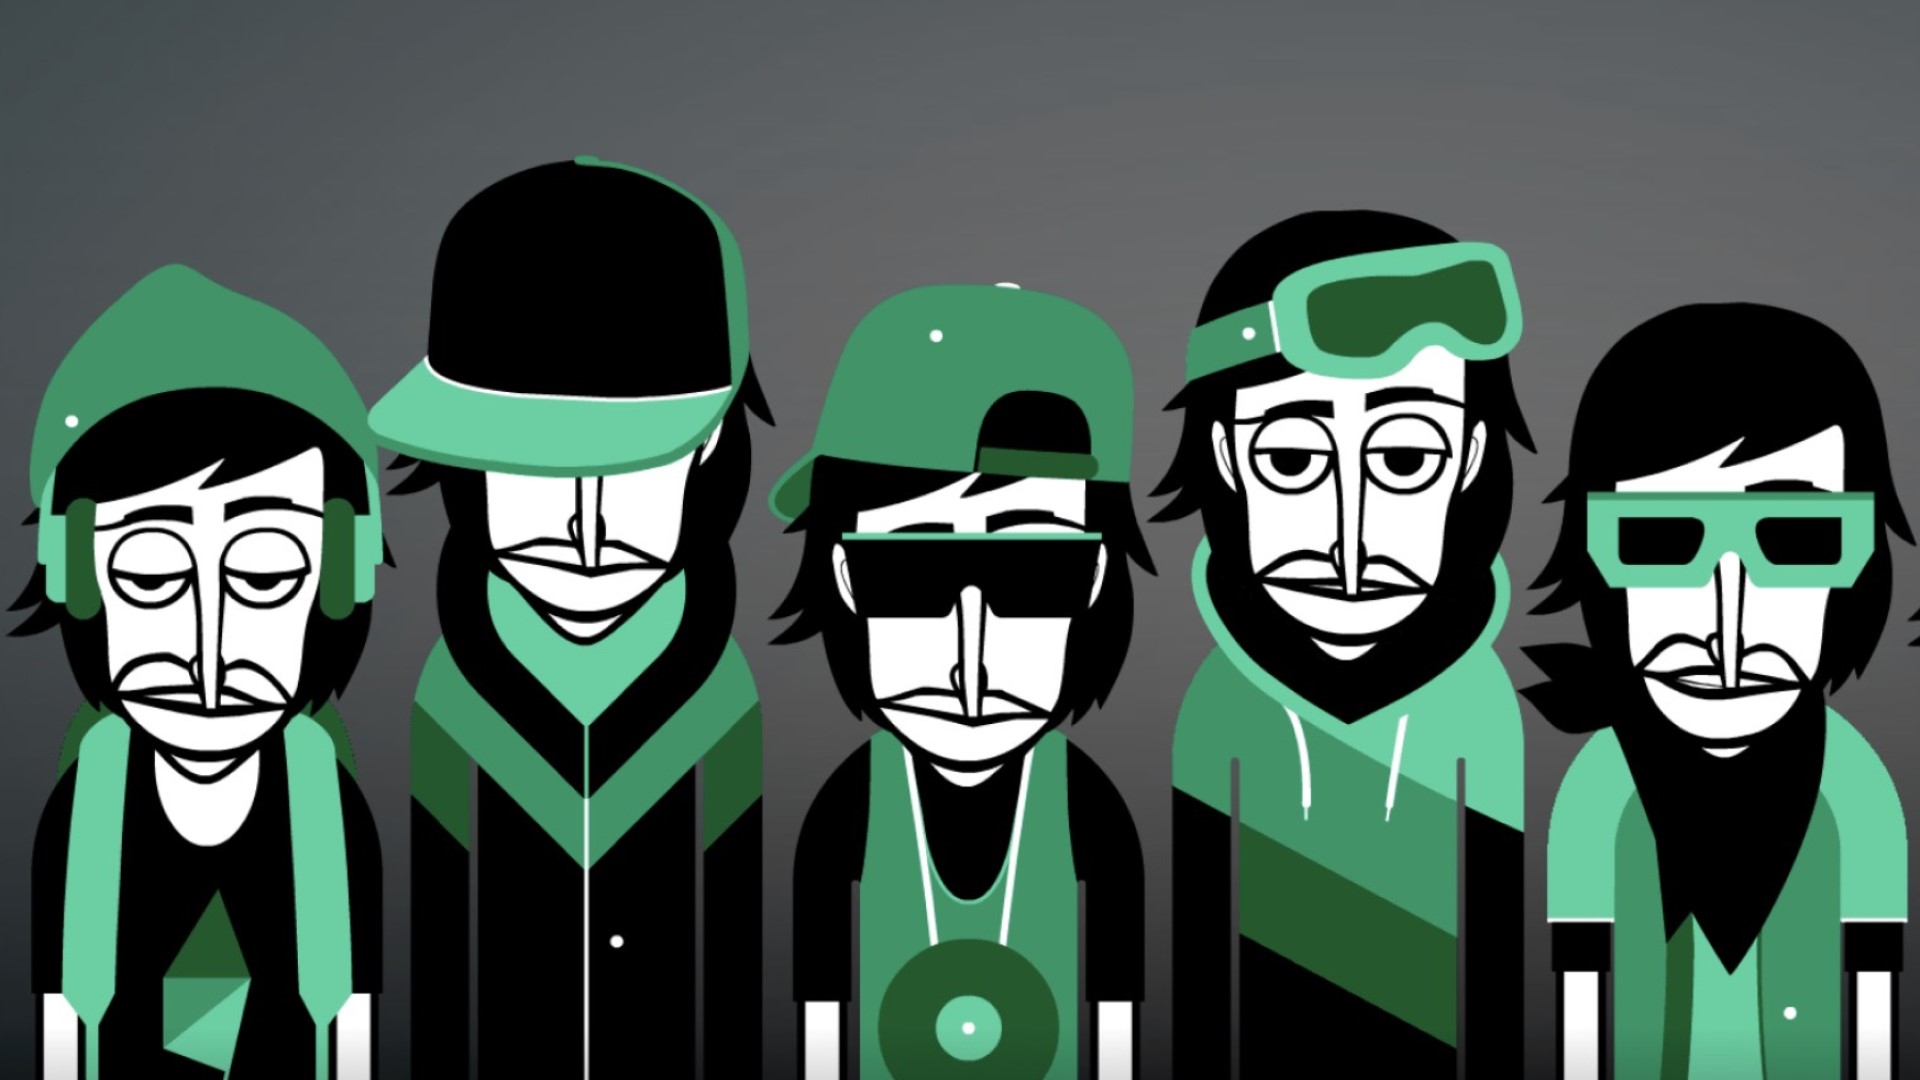 Incredibox beats – every beat for every 